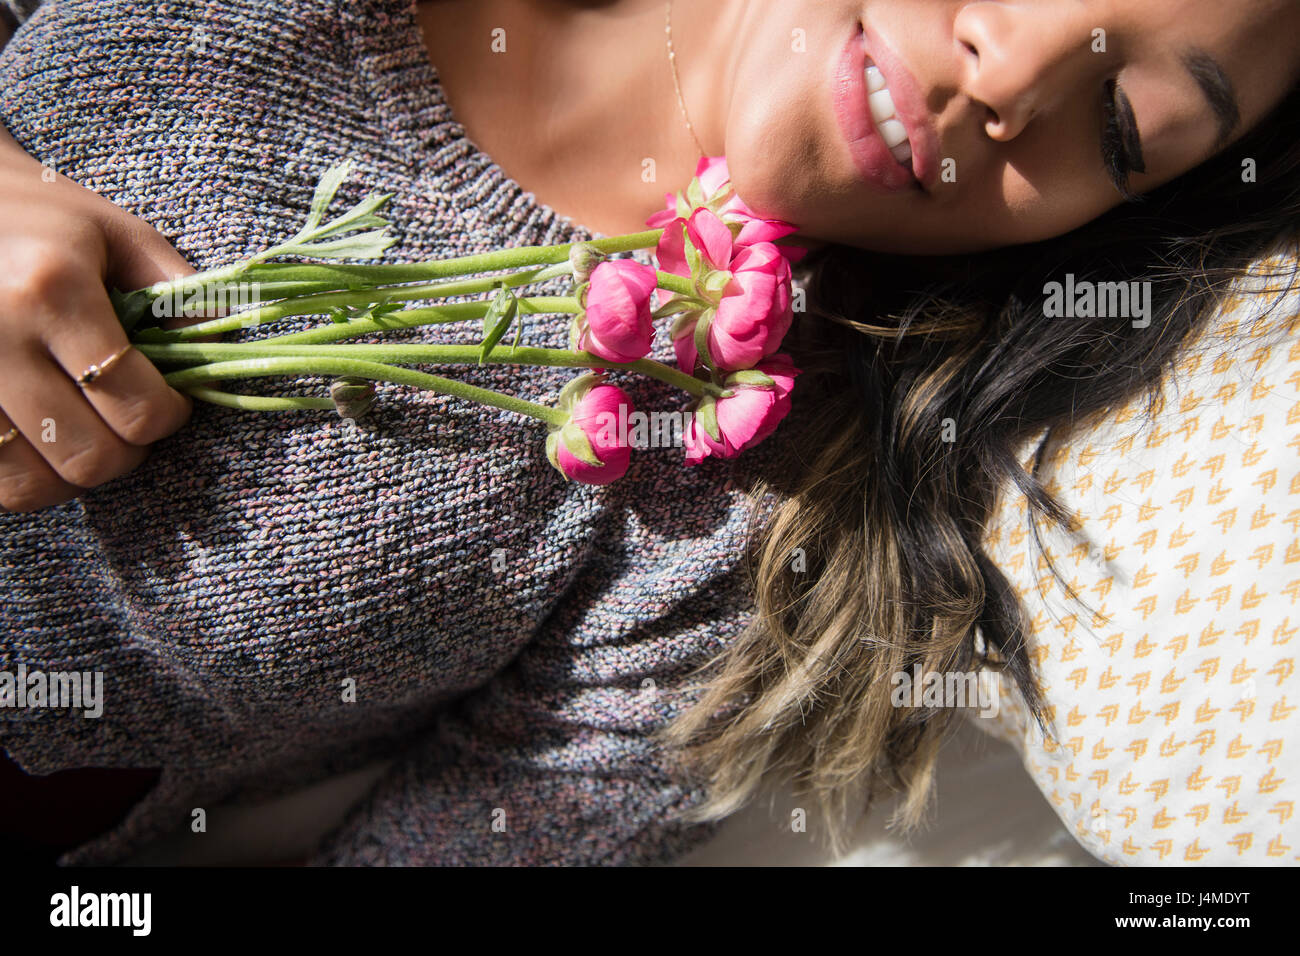 Mixed Race woman laying on bed holding flowers Stock Photo